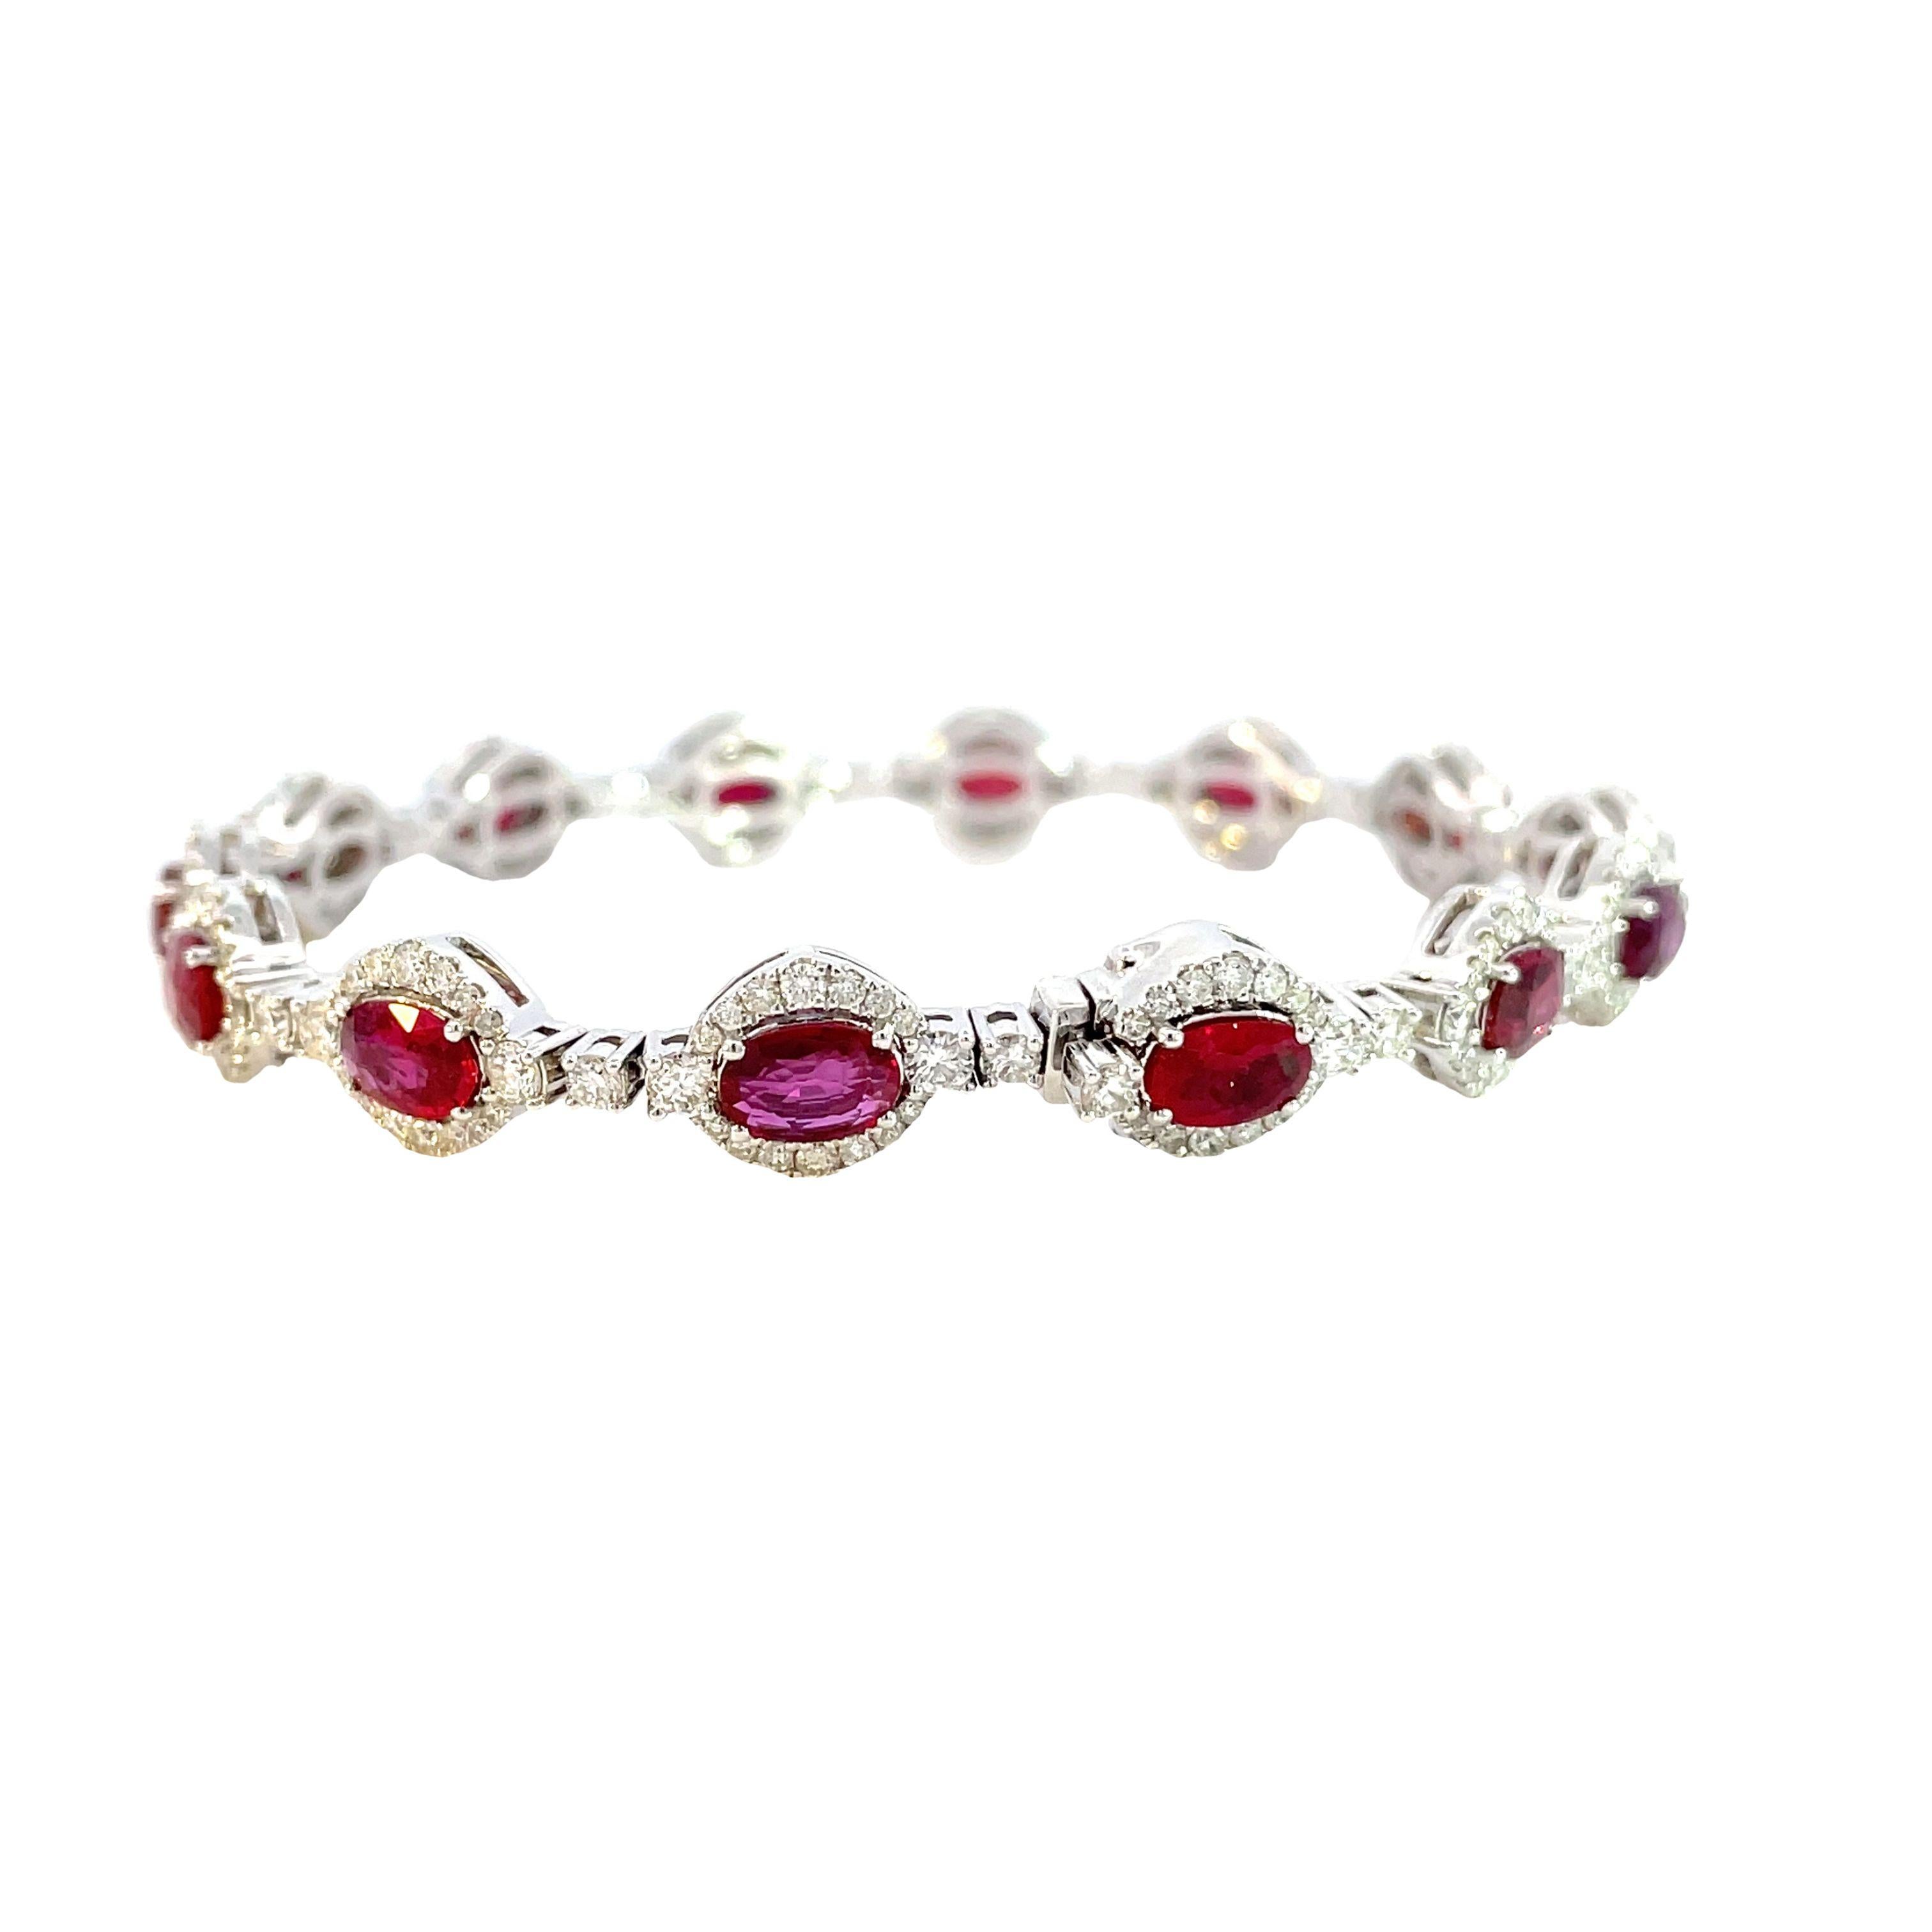 Radiant elegance meets timeless luxury in our Ruby Oval and White Diamond Round 14KW Bracelet. Featuring a stunning 8.53 carat oval-cut ruby surrounded by 2.90 carats of brilliant white diamonds, set in 14-karat white gold. Perfect for any occasion,